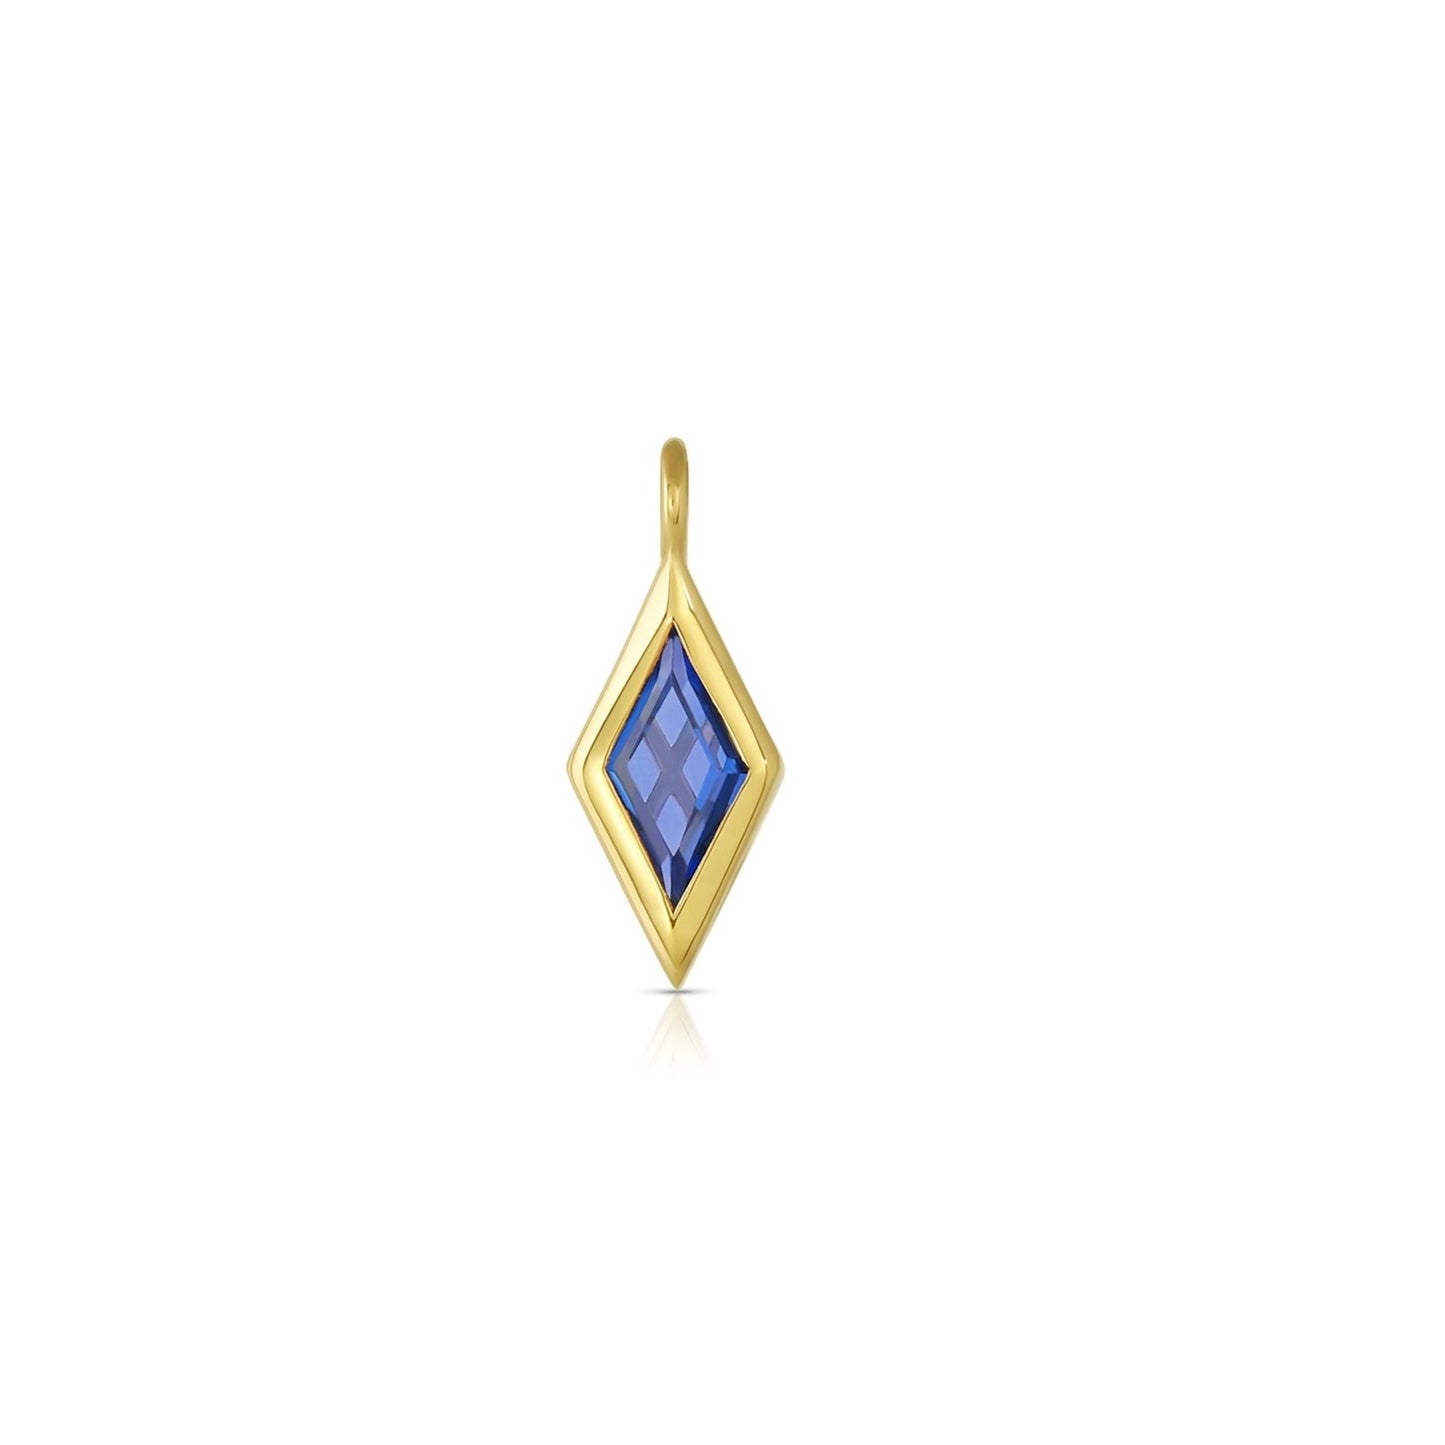 blue sapphire rhombus shaped pendant set in 18k yellow gold on white background.